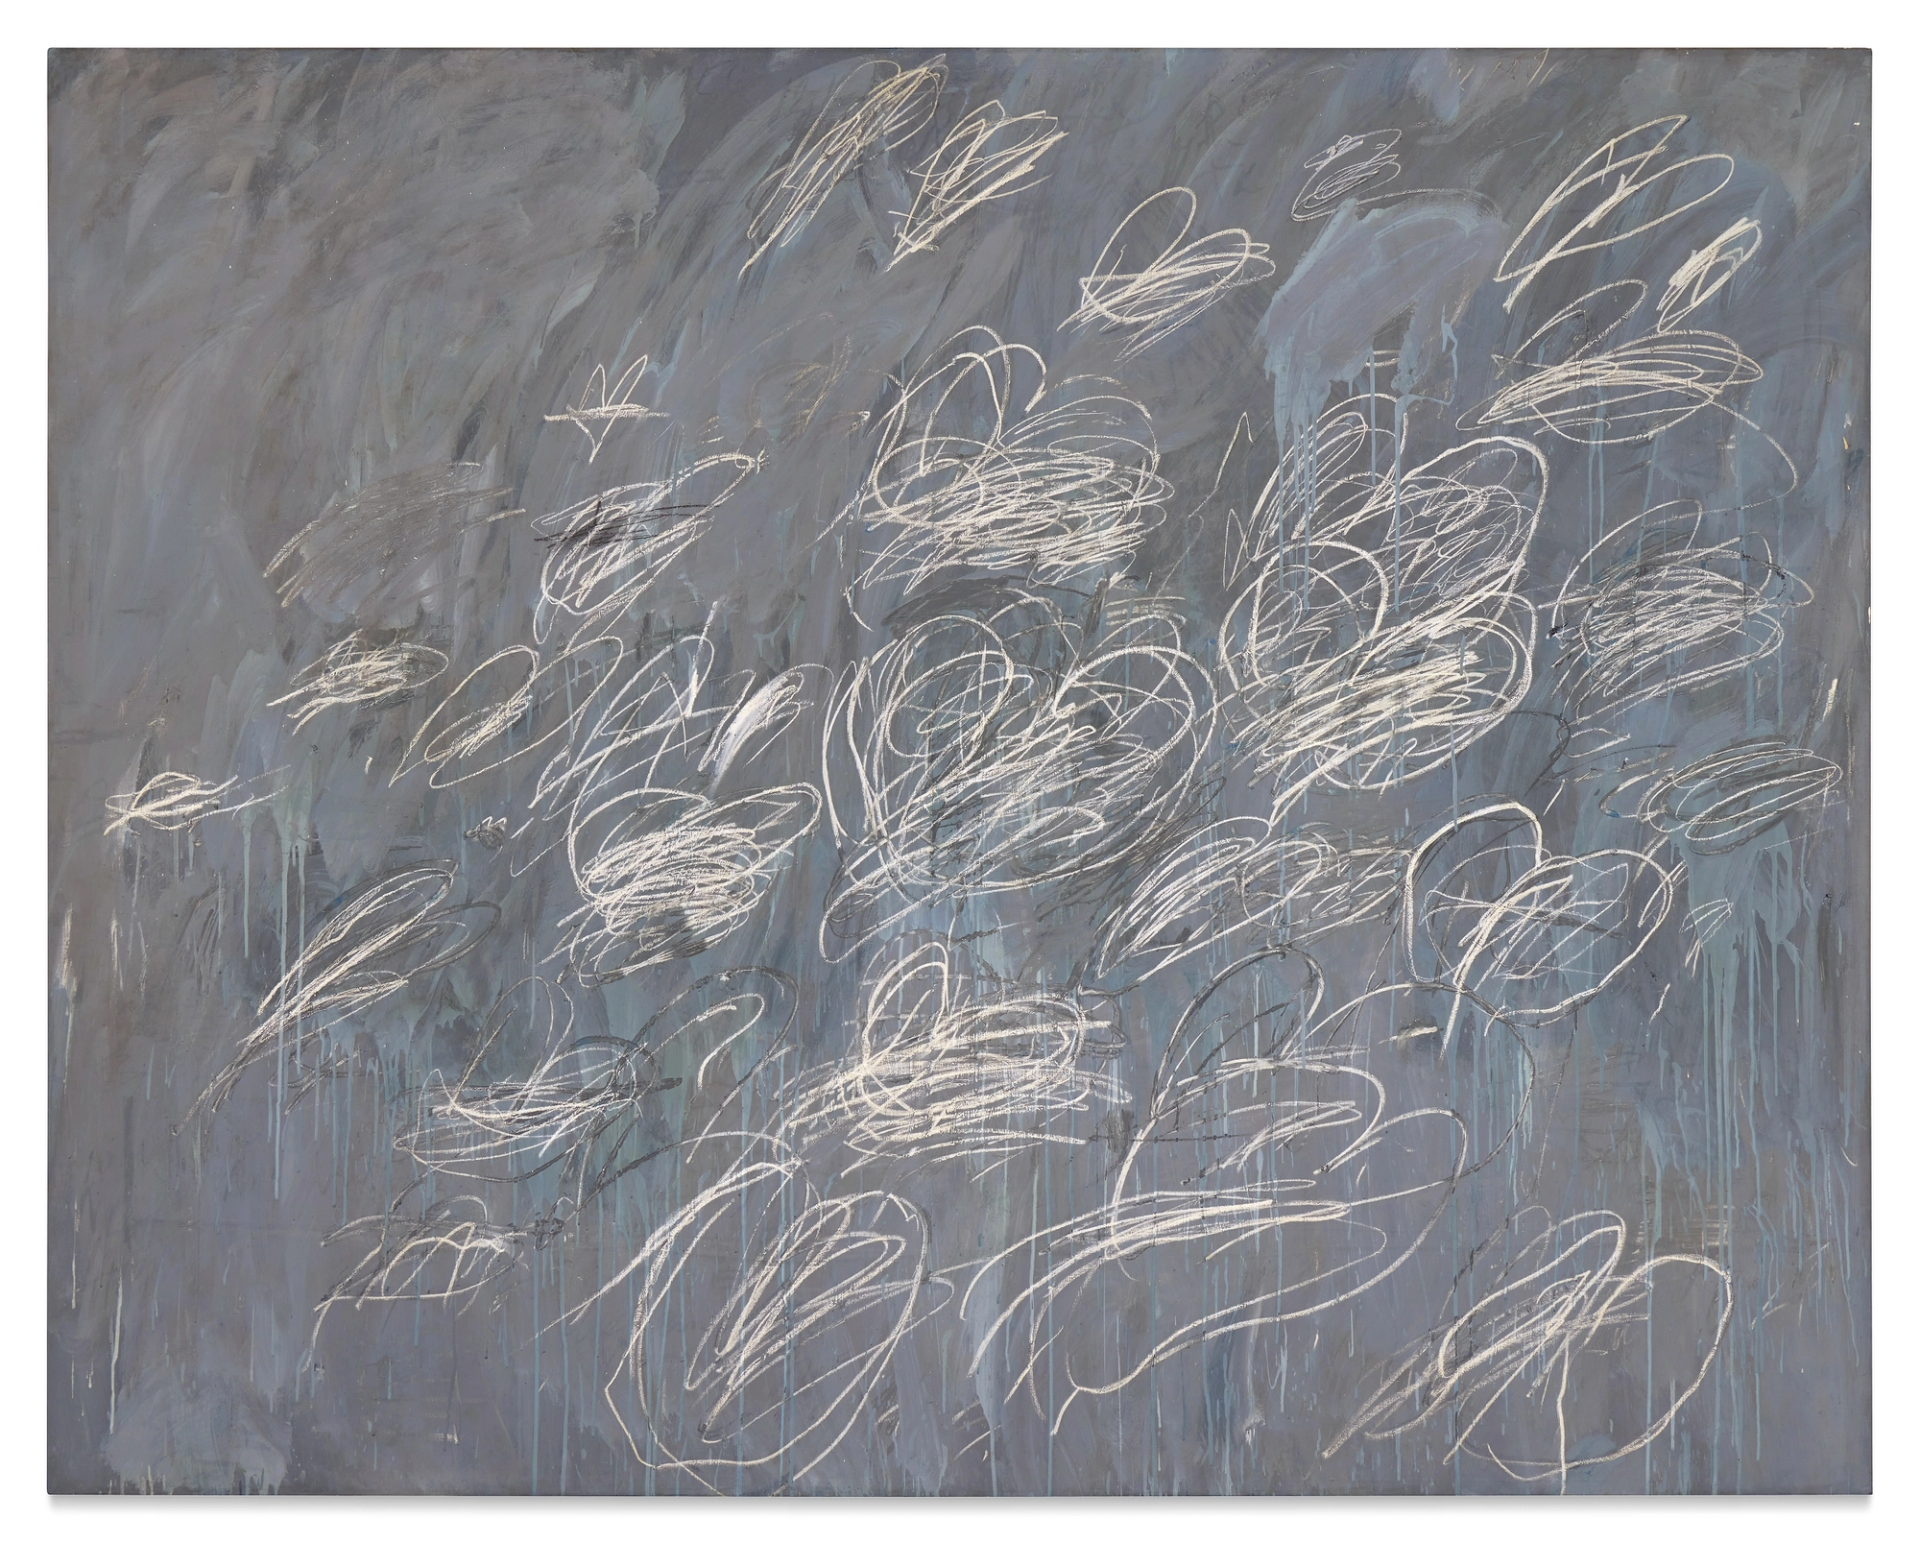 This Untitled work by Cy Twombly shows clusters of round white scribbles against a grey background.